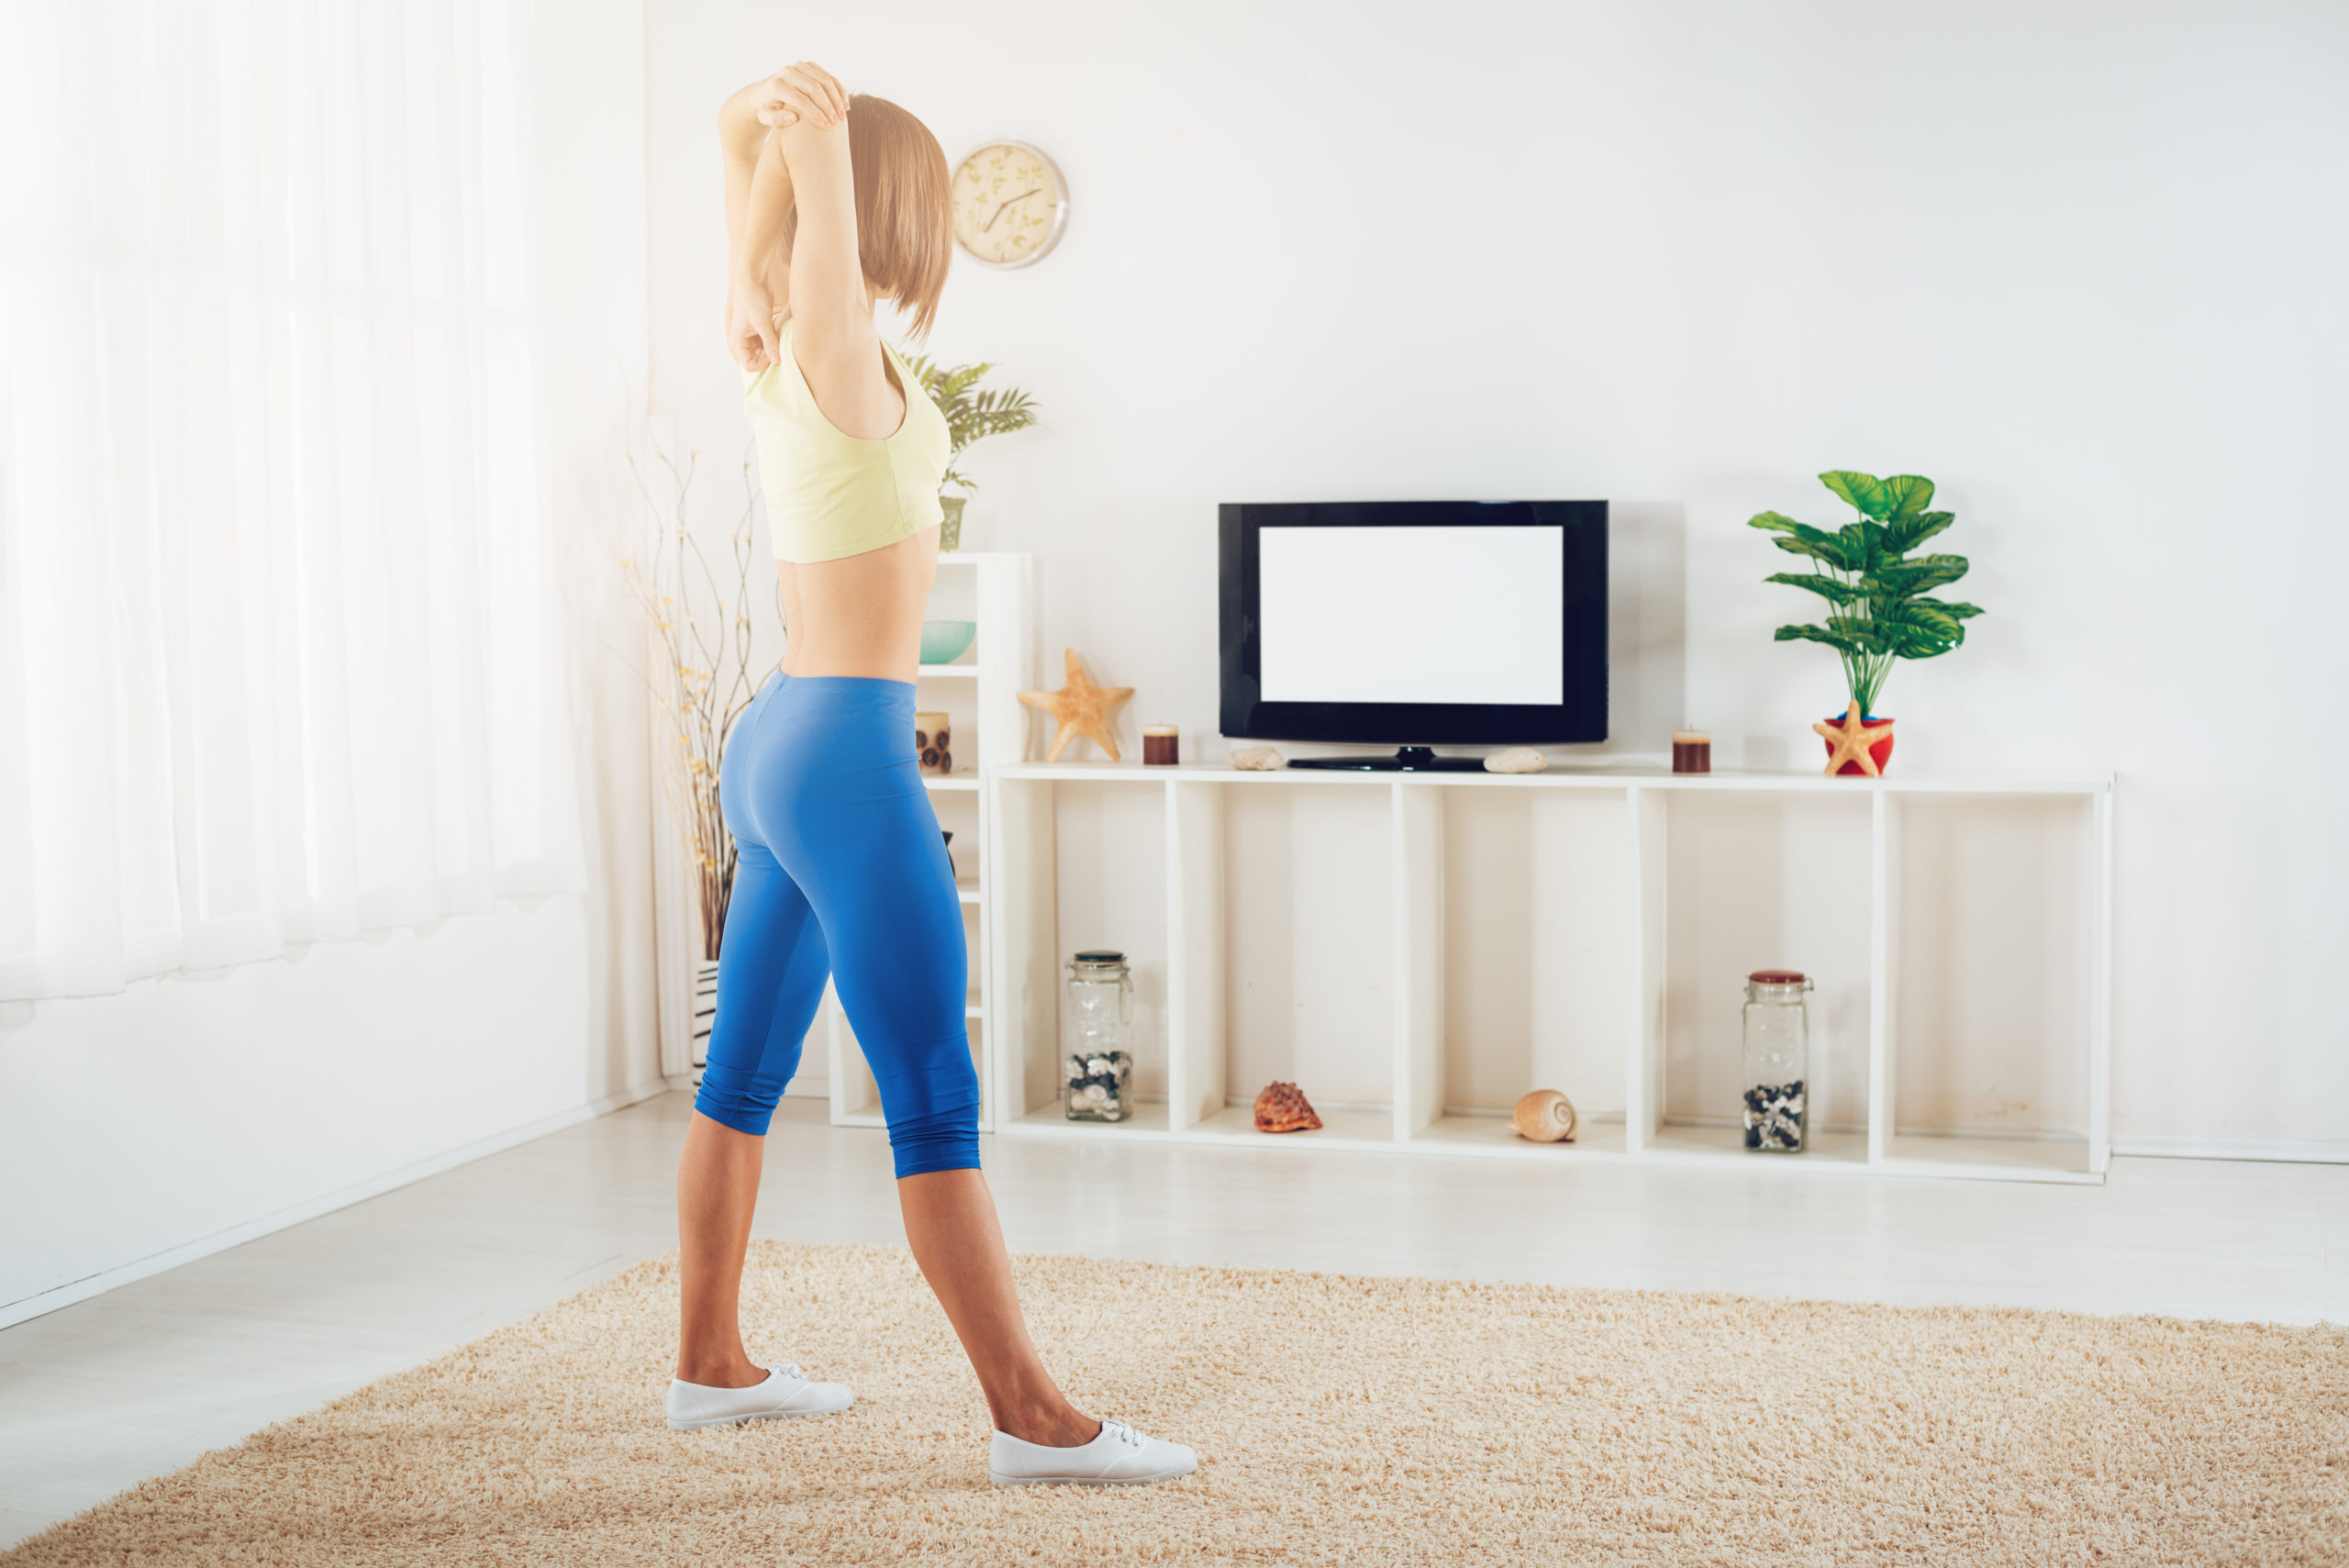 Fit woman warming up while doing stretching exercises at home in front of TV.